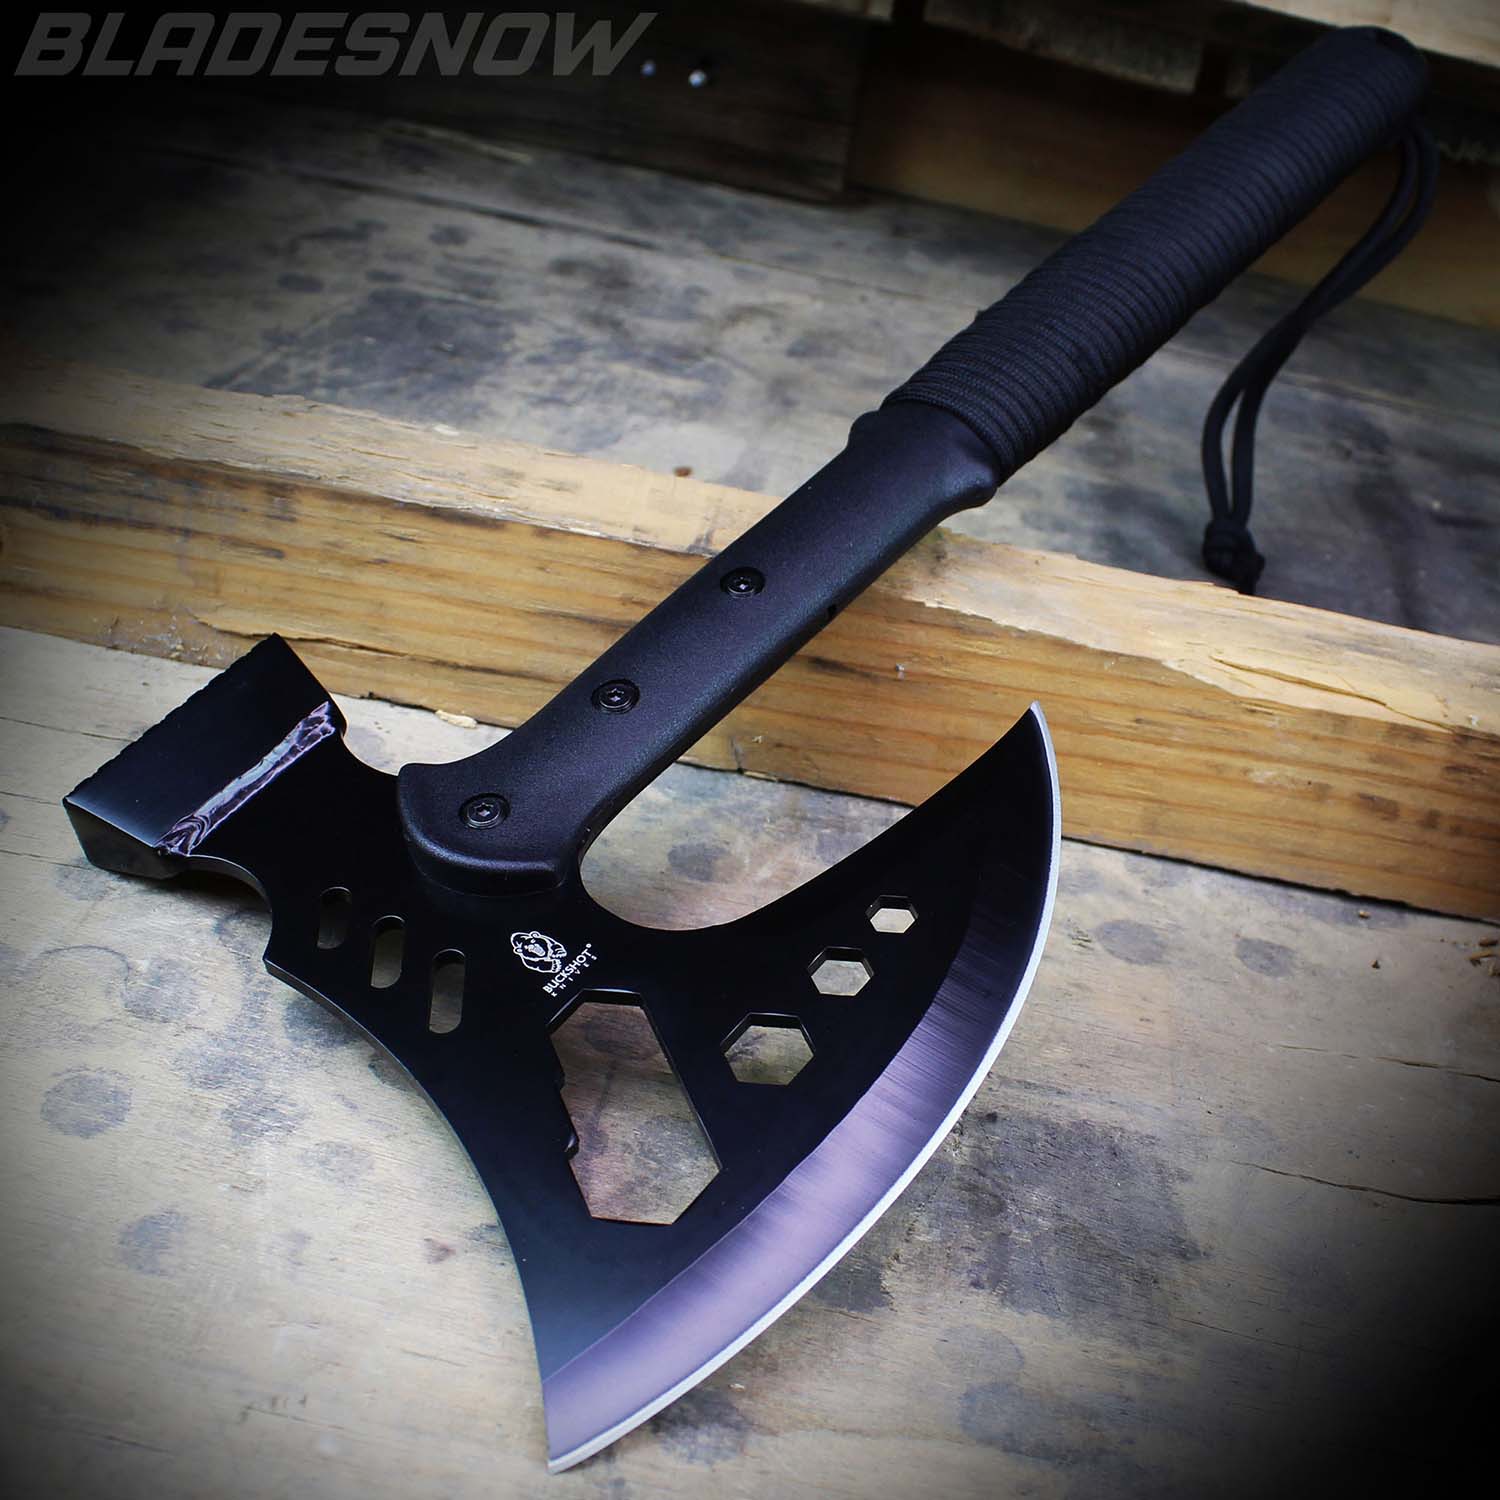 View All Now 2 Products | Swords Blades - Knives 